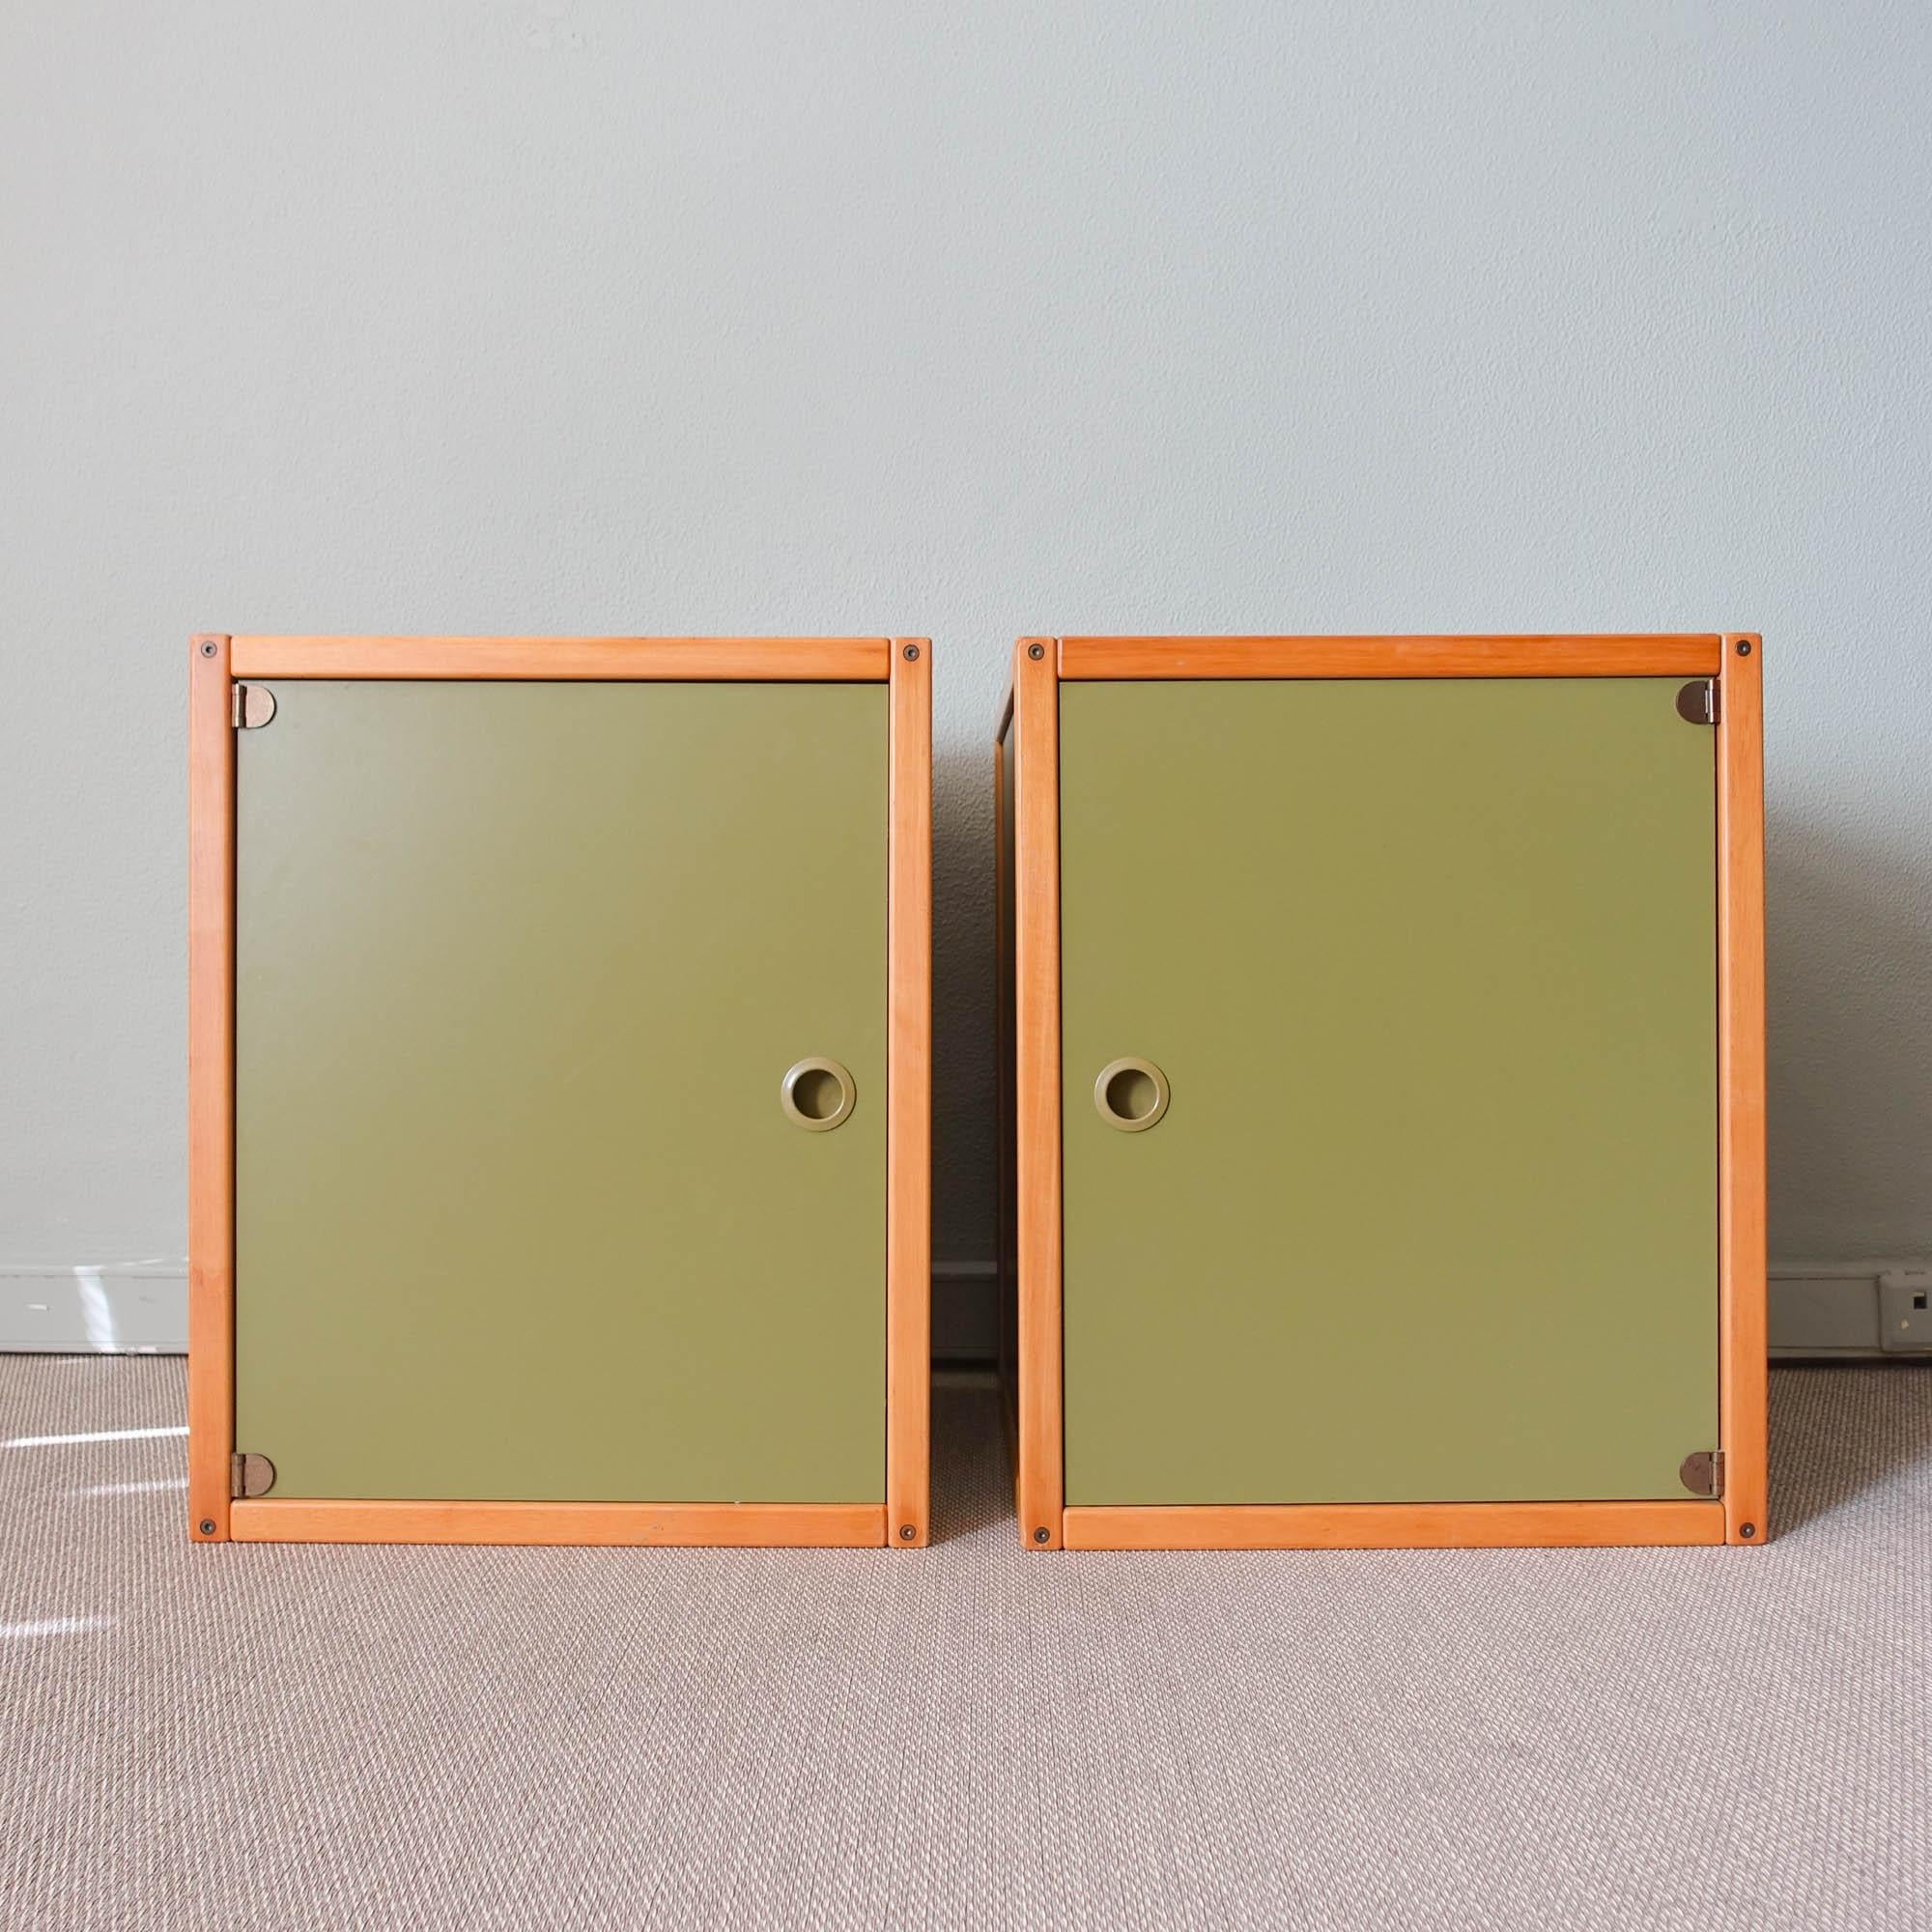 This pair of Storage Units from the Profilsystem Collection, was designed by Elmar Flötotto for Flötotto, in Germany, during the 1980's. The principle behind the Profilsystem it is simple. The modules can be easily combined with one another. They